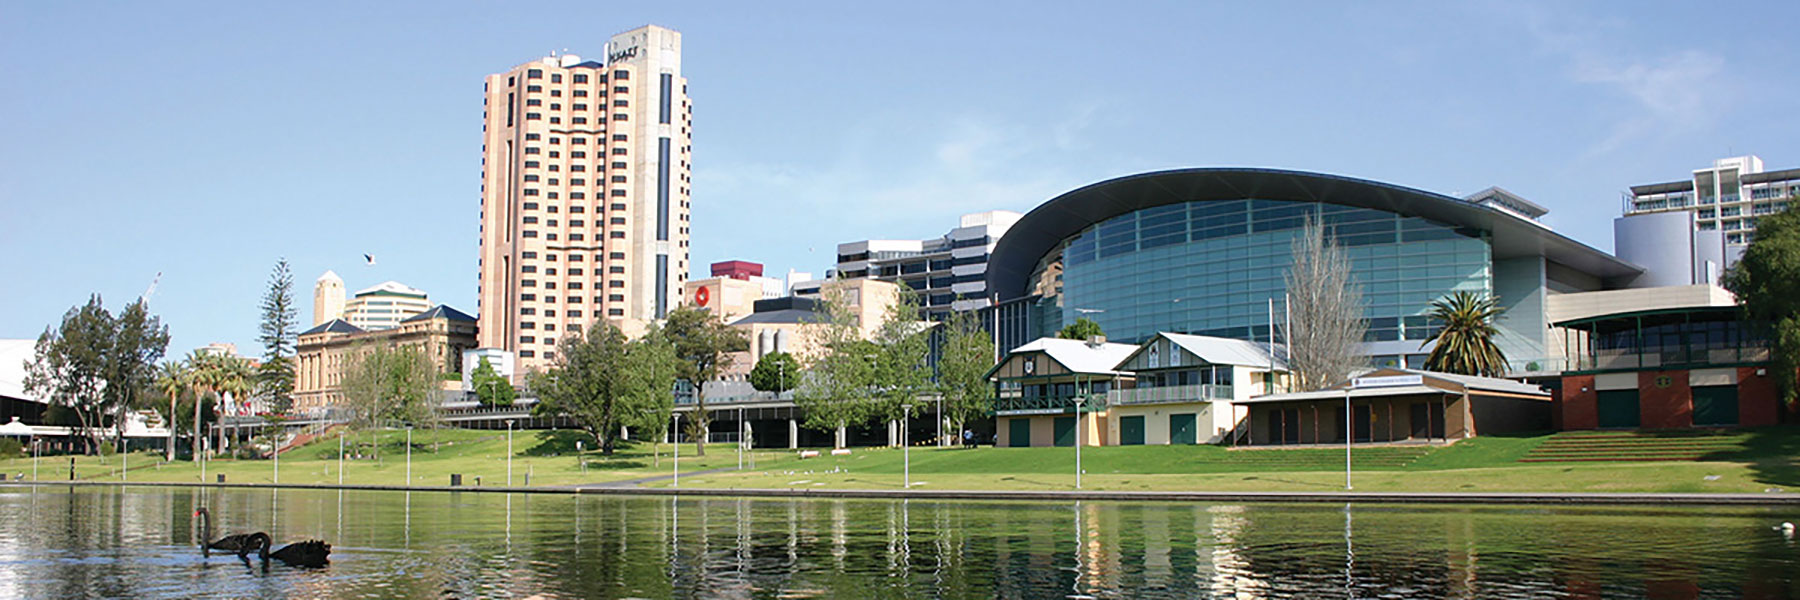 Adelaide Campus | Academy Of Interactive Entertainment